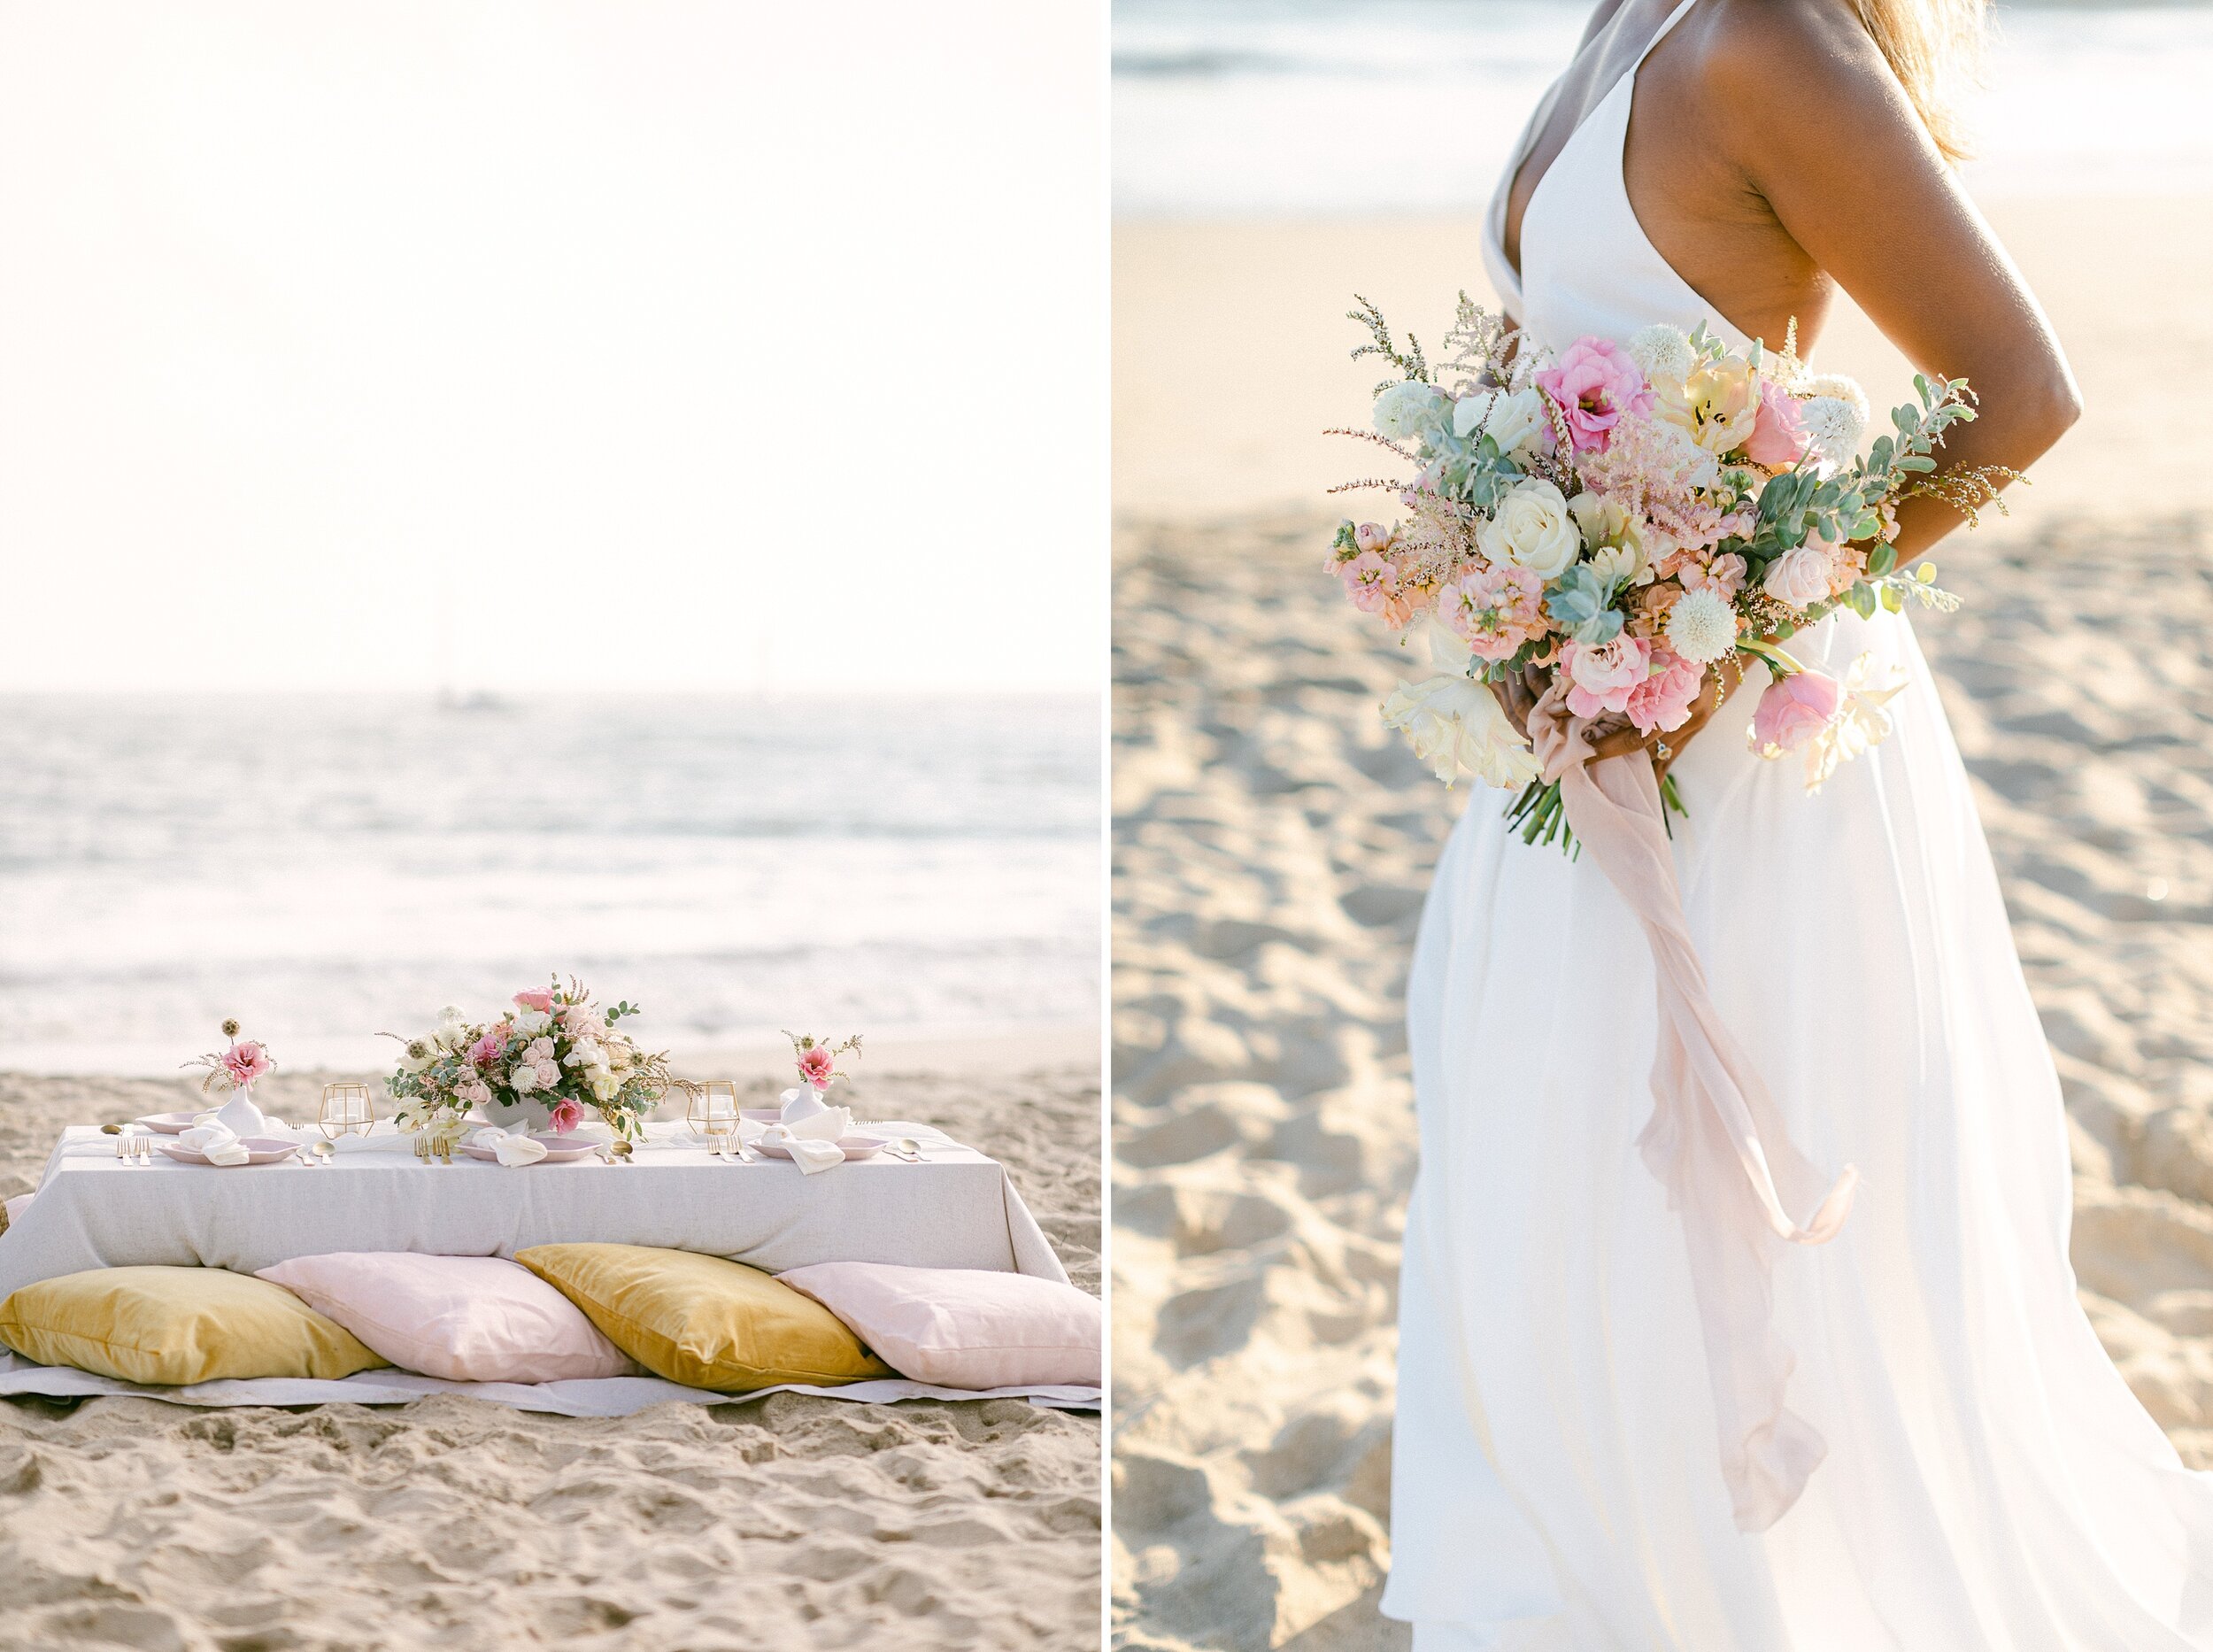  Images on the right show the bride of color wearing a white spaghetti strap and v-neck gown while holding a bouquet of pink and white flowers at her hip.  Images on the left show al fresco beachside picnic with blush and mustard pillows for seating, cream linen table cloth and pink and white centerpiece.